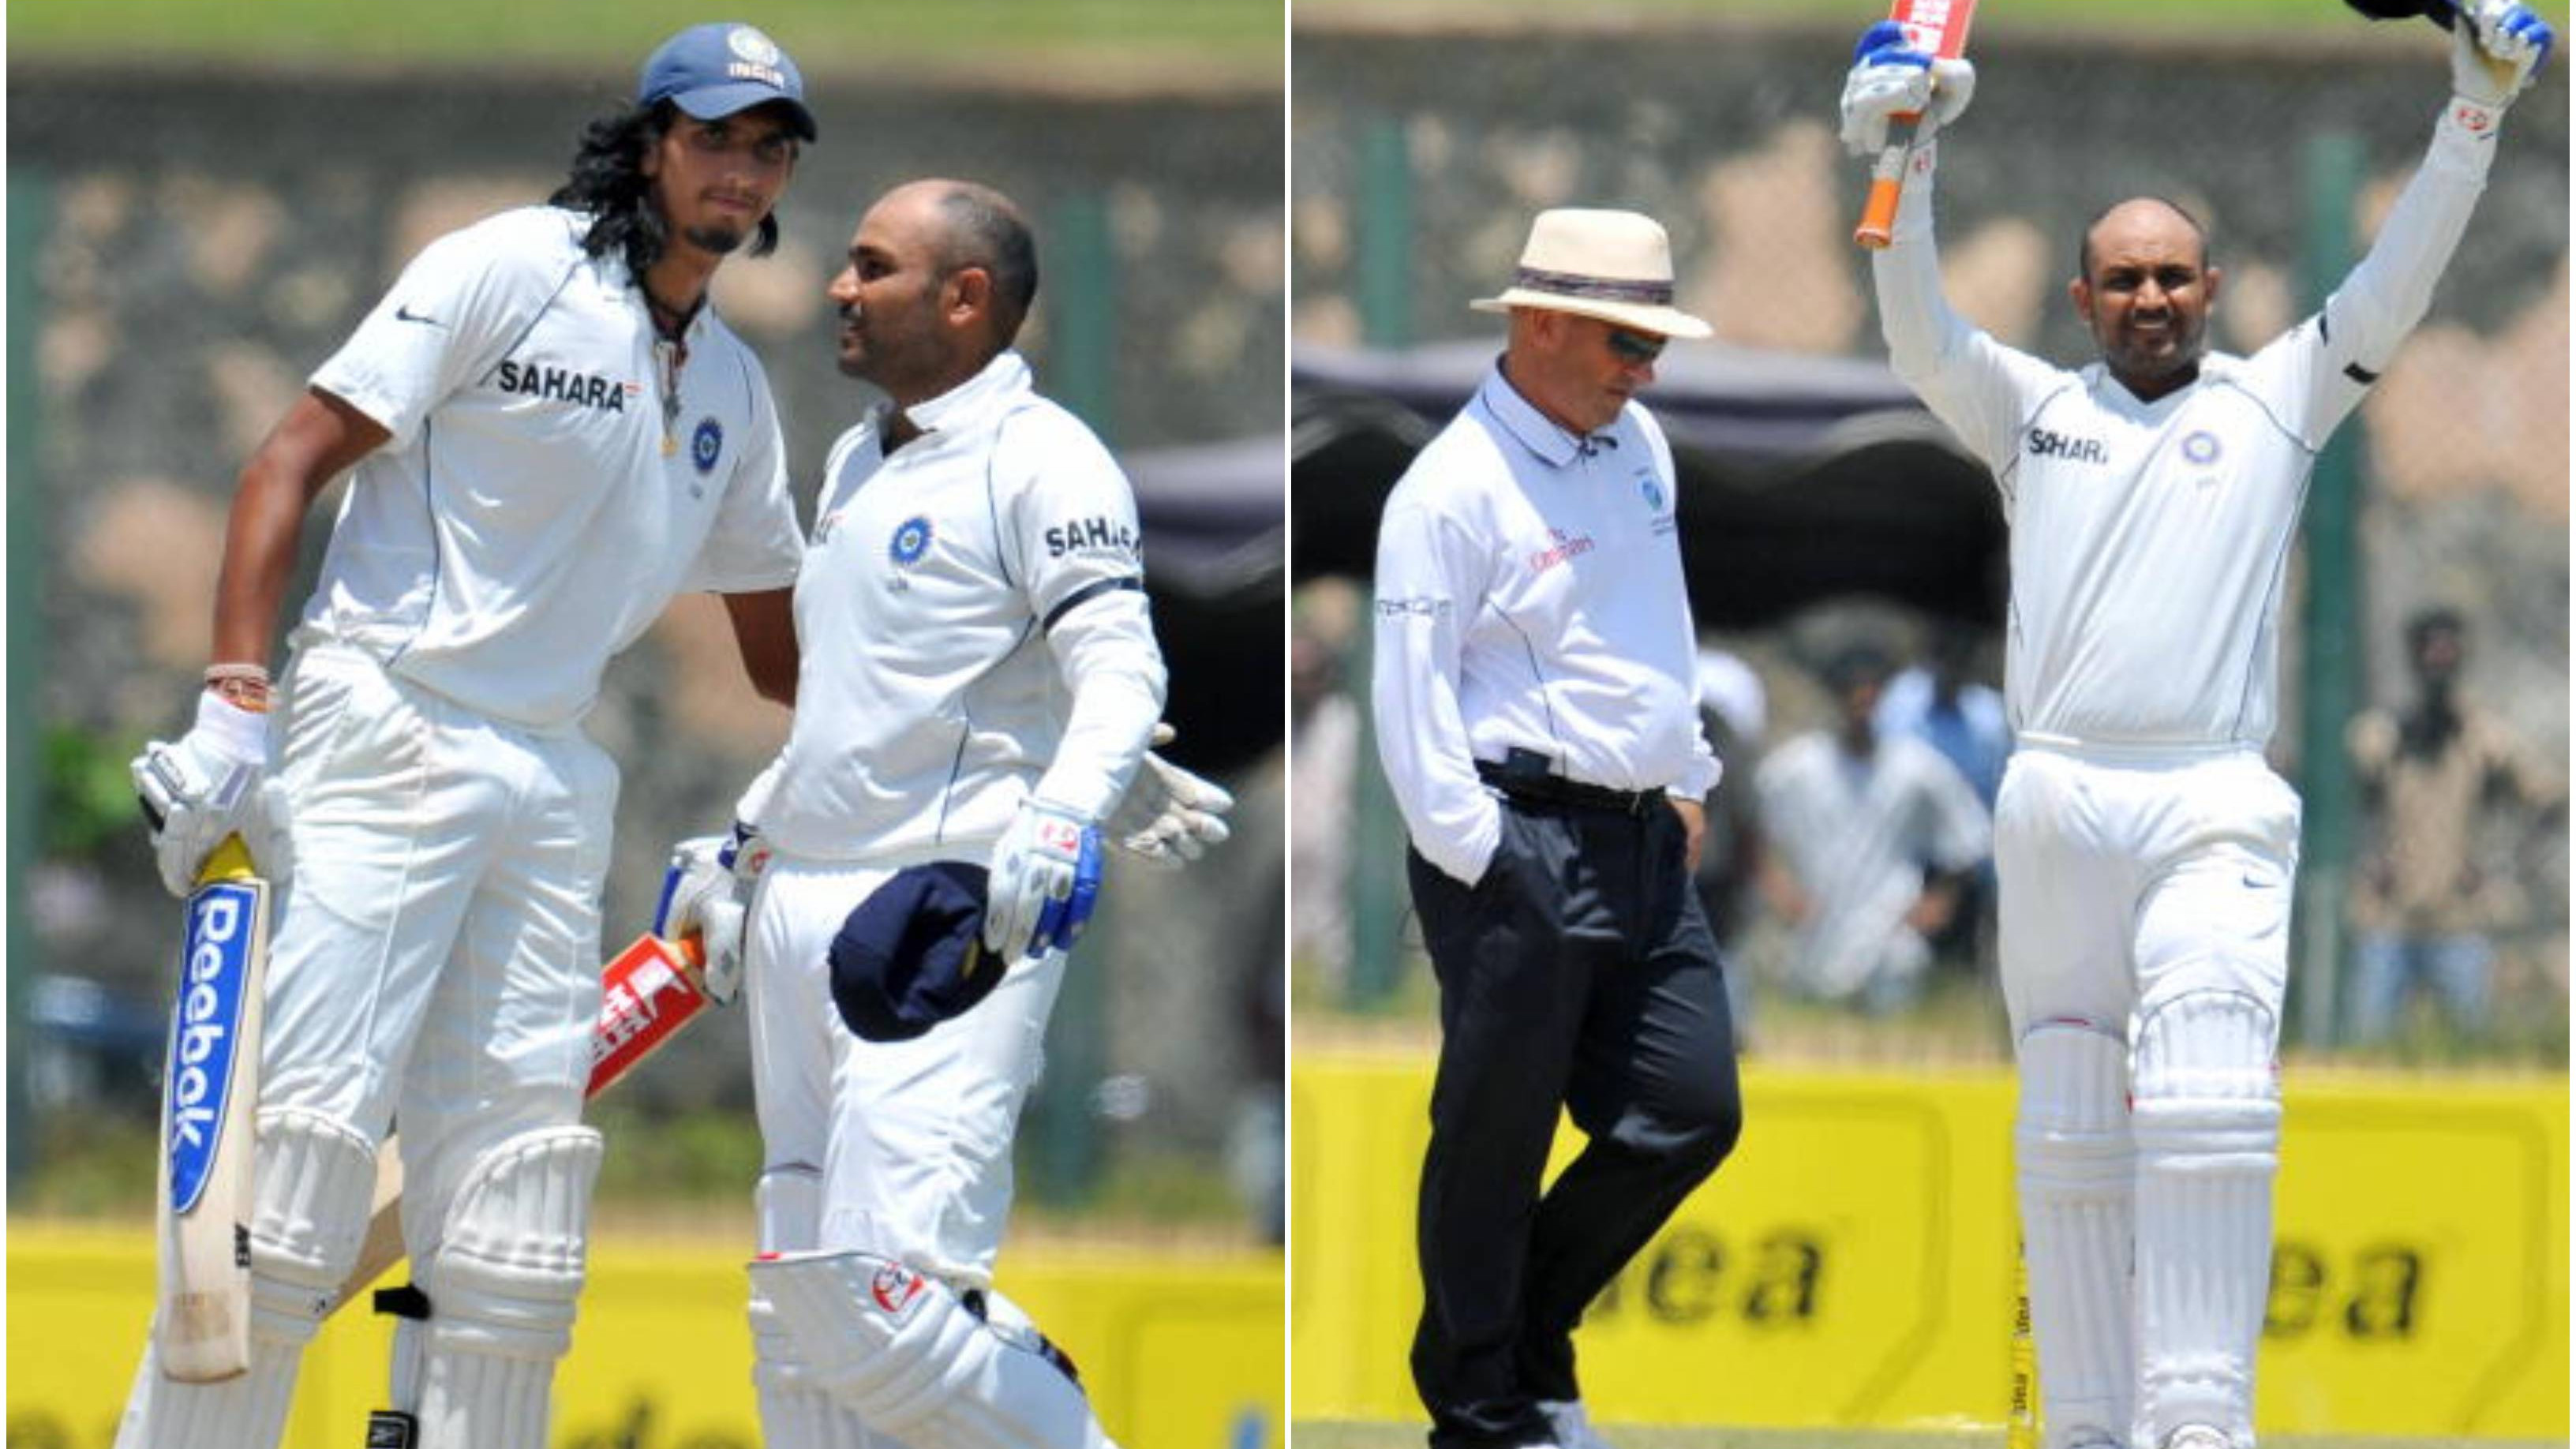 “I was batting on 199, Ishant came to me and said…”: Sehwag recalls his ‘unselfish’ act during Galle Test in 2008